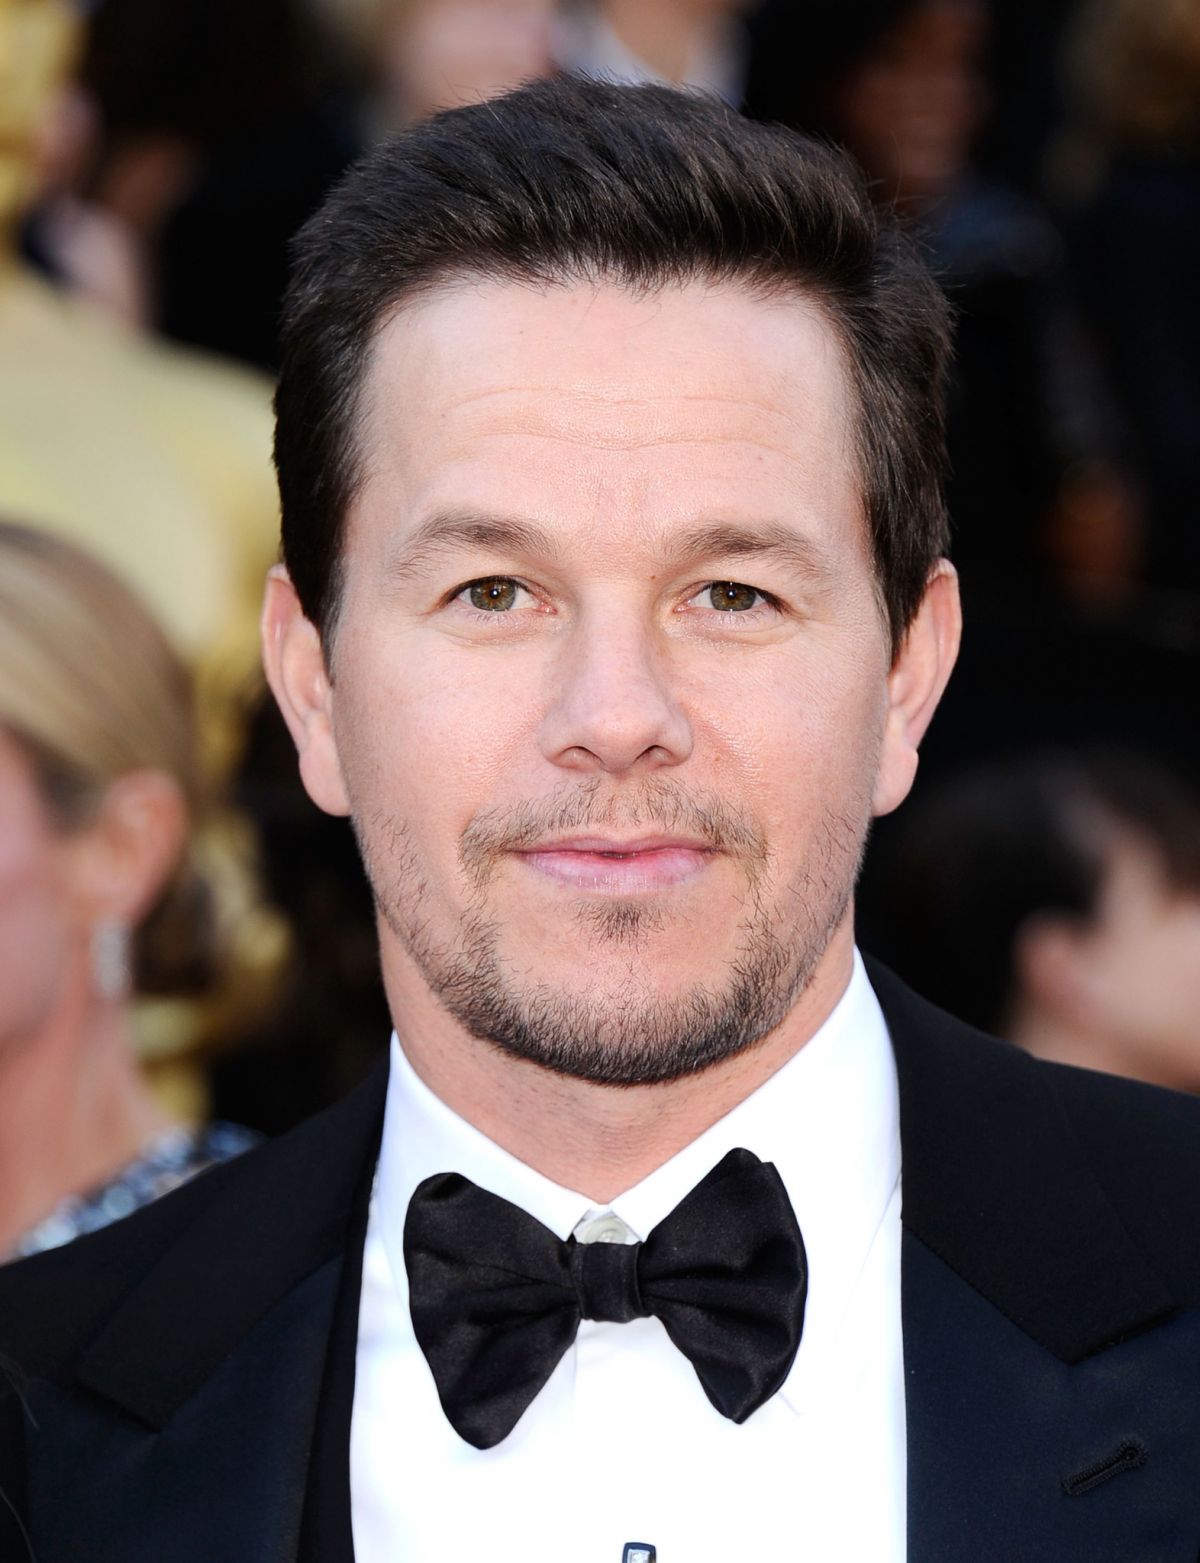 Netflix is talking to Mark Wahlberg for this film